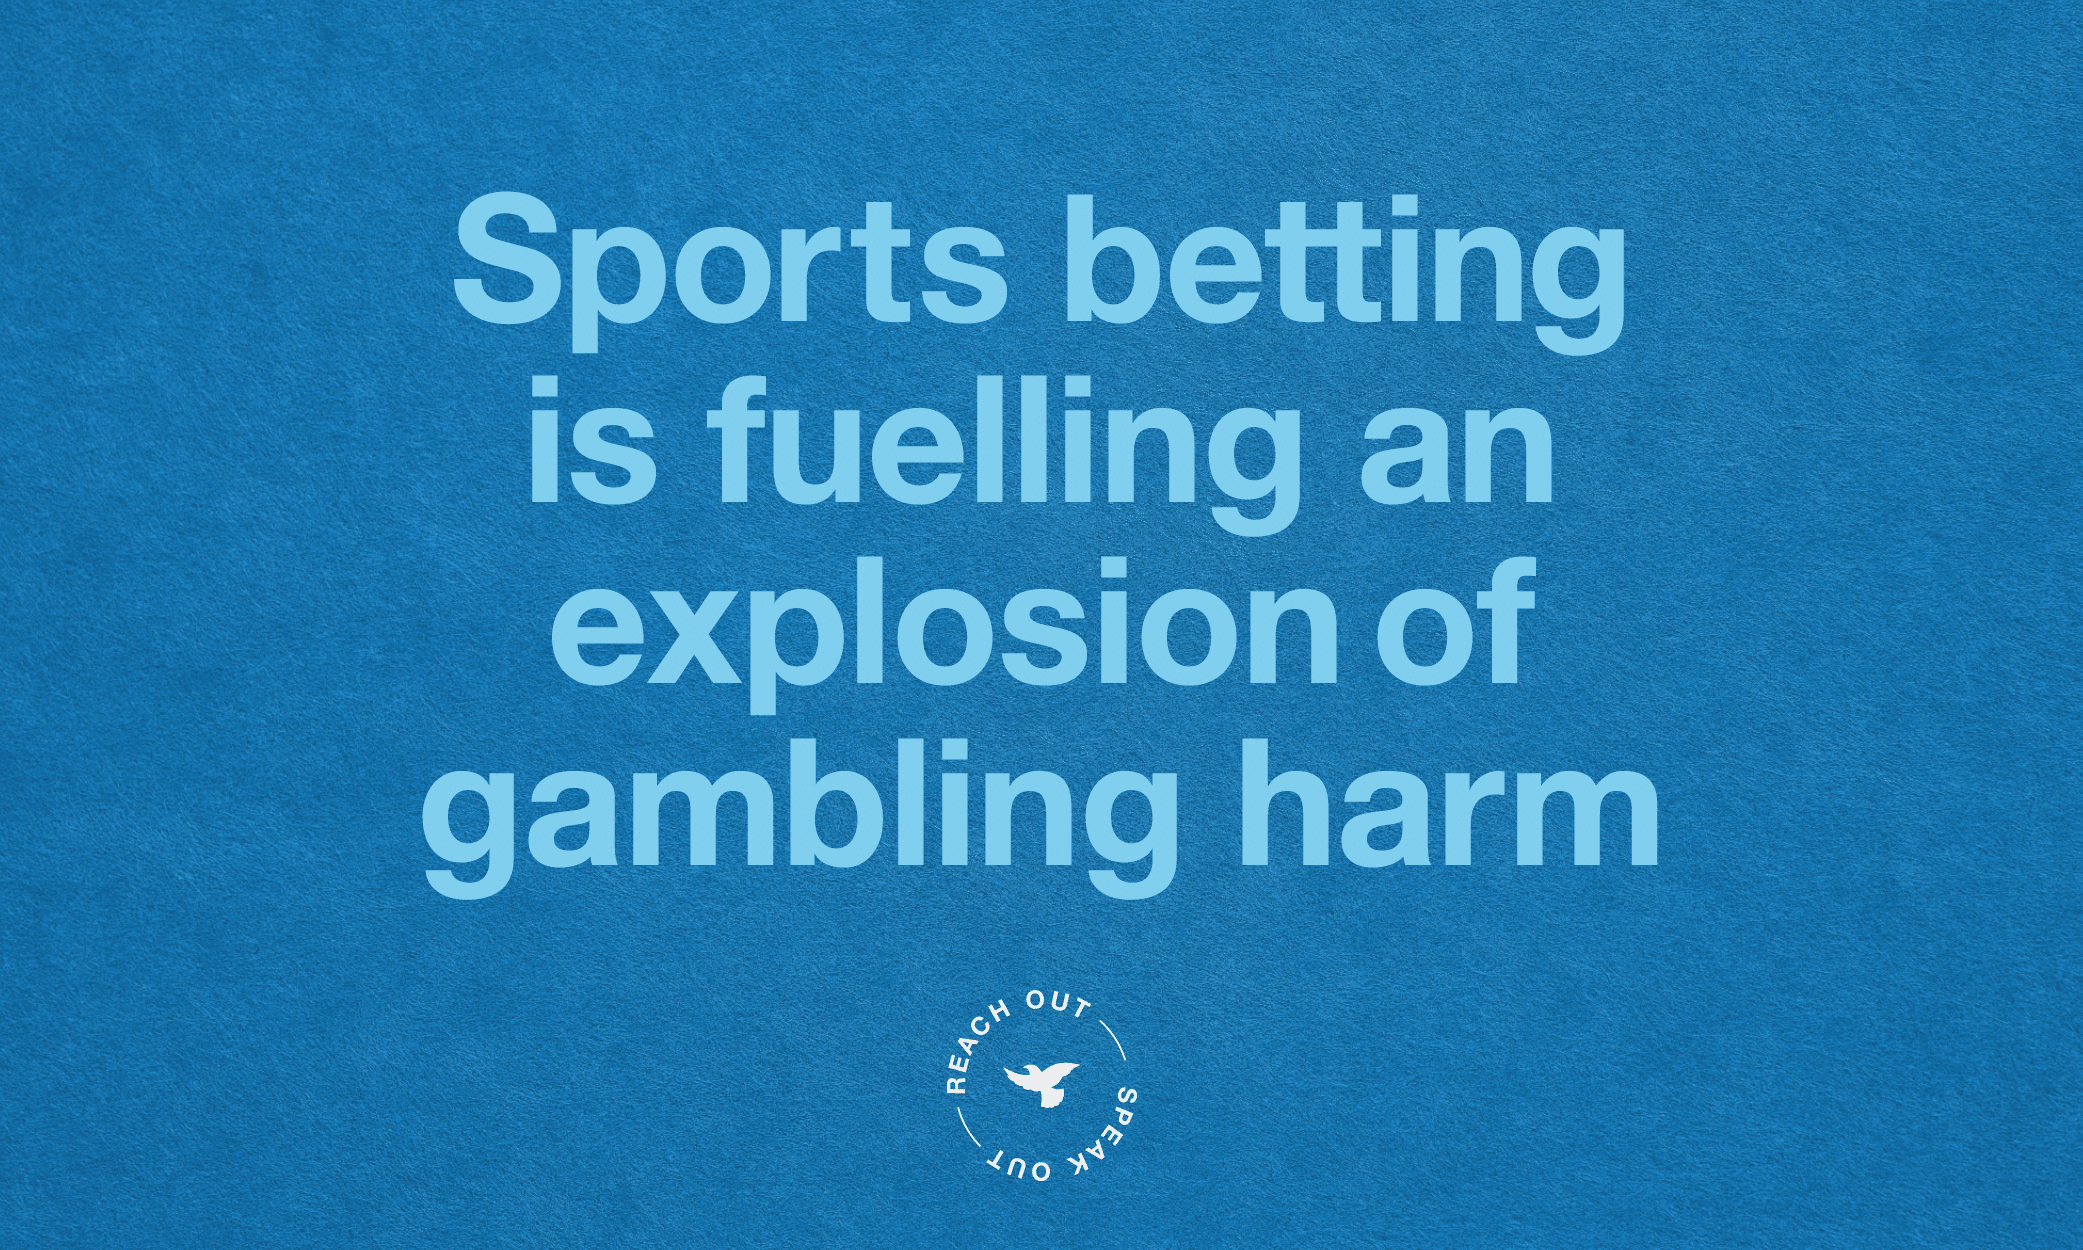 sports betting is fuelling gambling harm